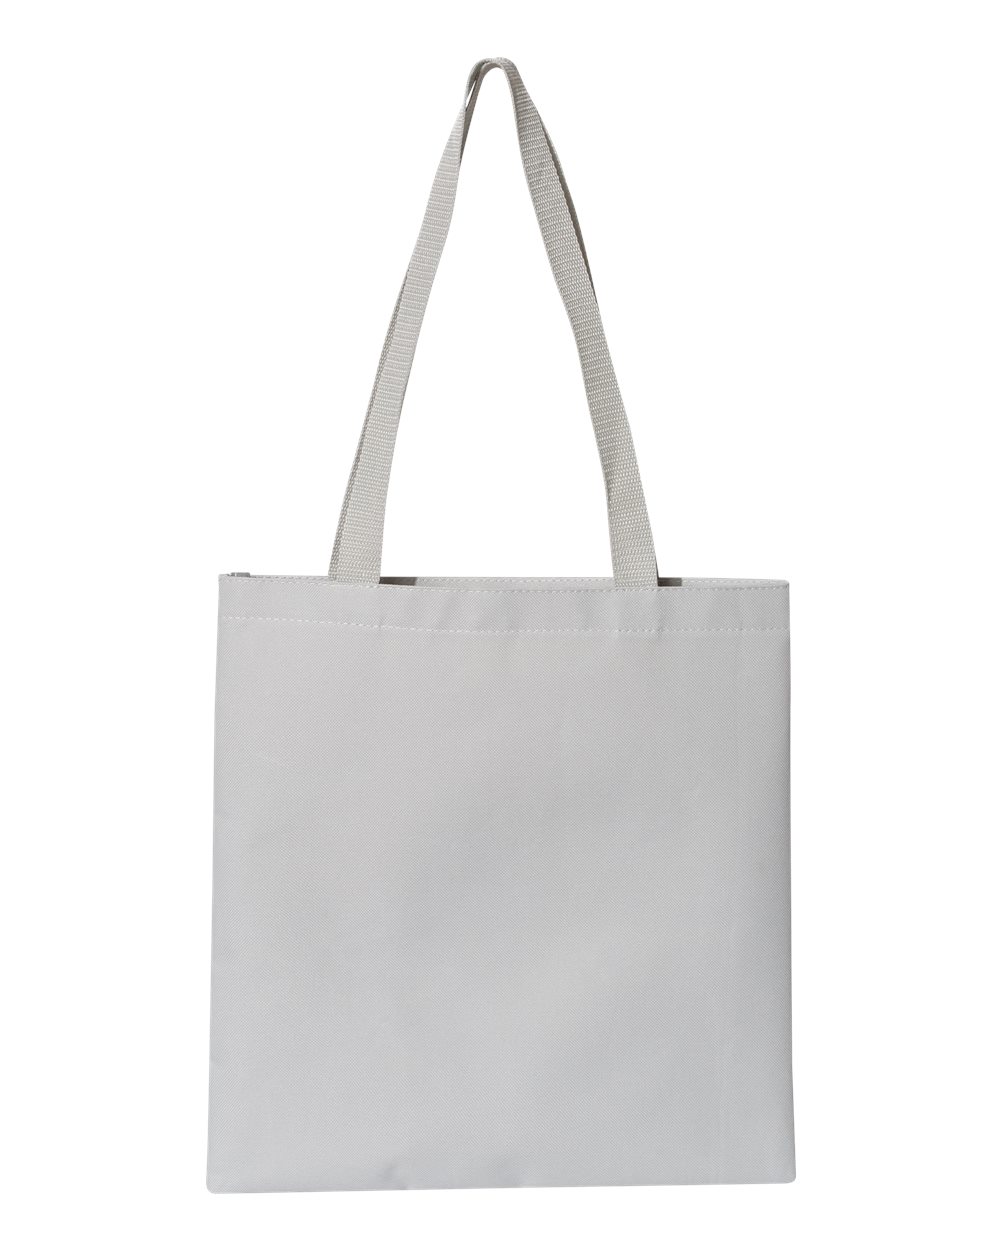 Liberty Bags 8801 - Recycled Basic Tote $3.33 - Bags